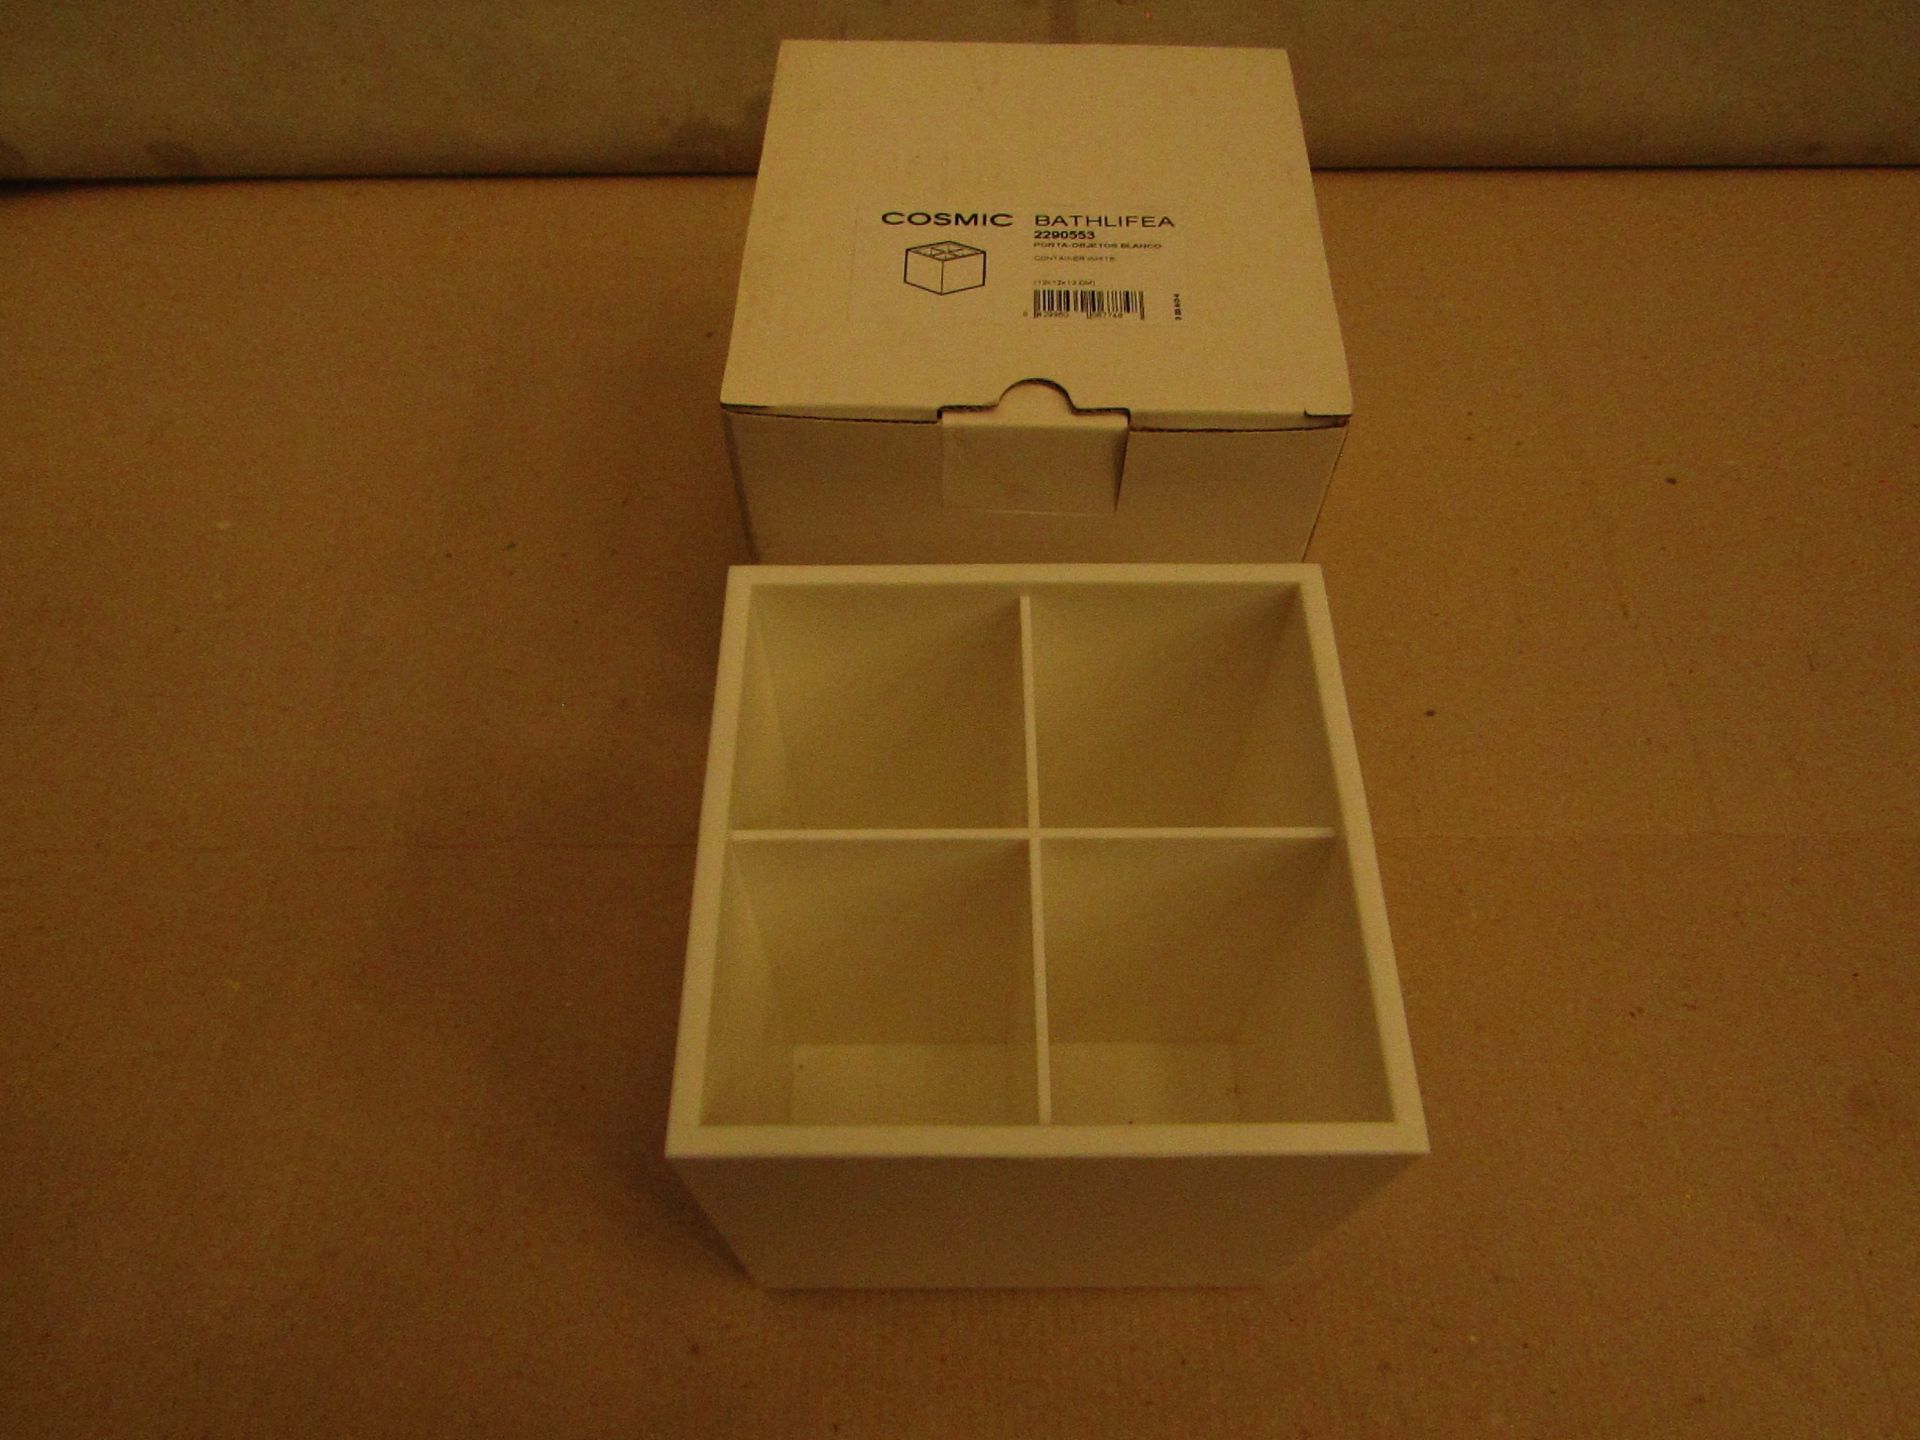 Cosmic - Bathlifea White Container ( 12x12x12cm ) - New & Boxed. - Image 2 of 2